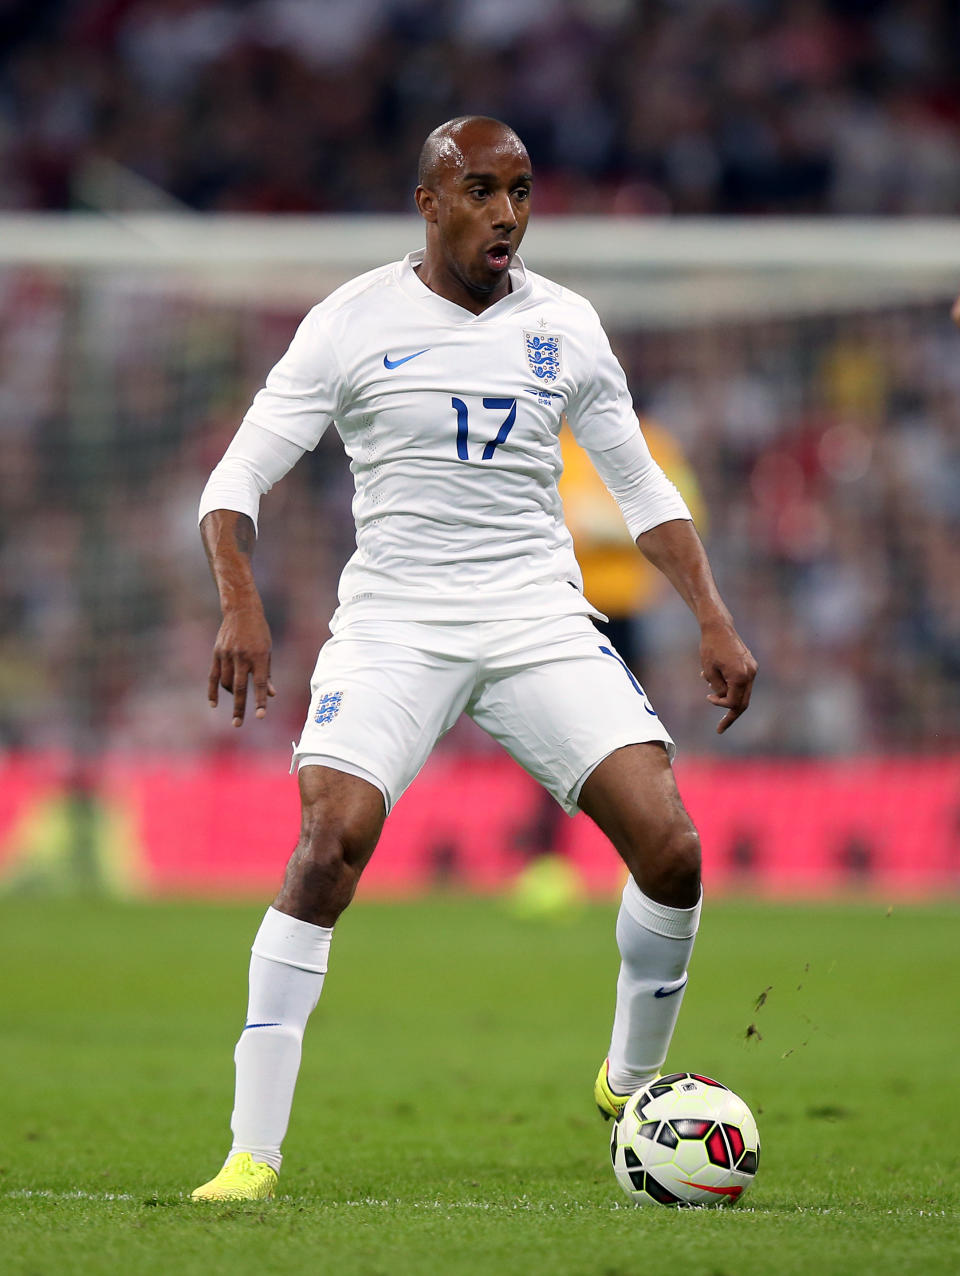 <p>Fabian Delph<br> Age 28<br> Caps 9<br>Won his last cap in 2015 but would surely have featured more were it not for injury issues. Made 29 appearances for Guardiola’s all-conquering Manchester City side, at left-back and midfield, and can only have improved from being around that environment.<br>Key stat: Started 13 games in City’s Premier League-record winning run of 18 – though he also played in both of their league defeats this season. </p>